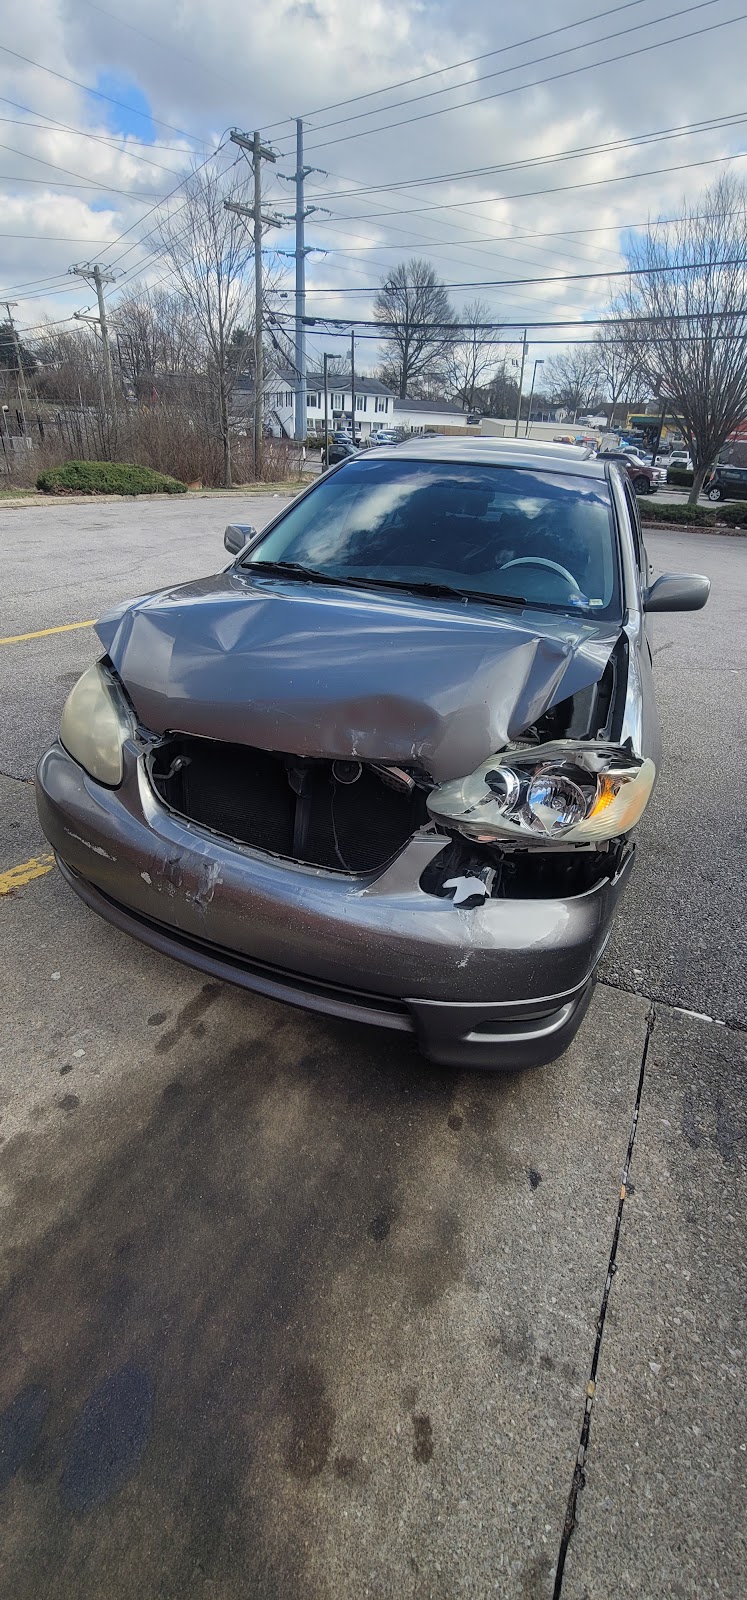 Auto Sports Collision Care Inc | 251 Industry Pkwy, Nicholasville, KY 40356 | Phone: (859) 885-4016